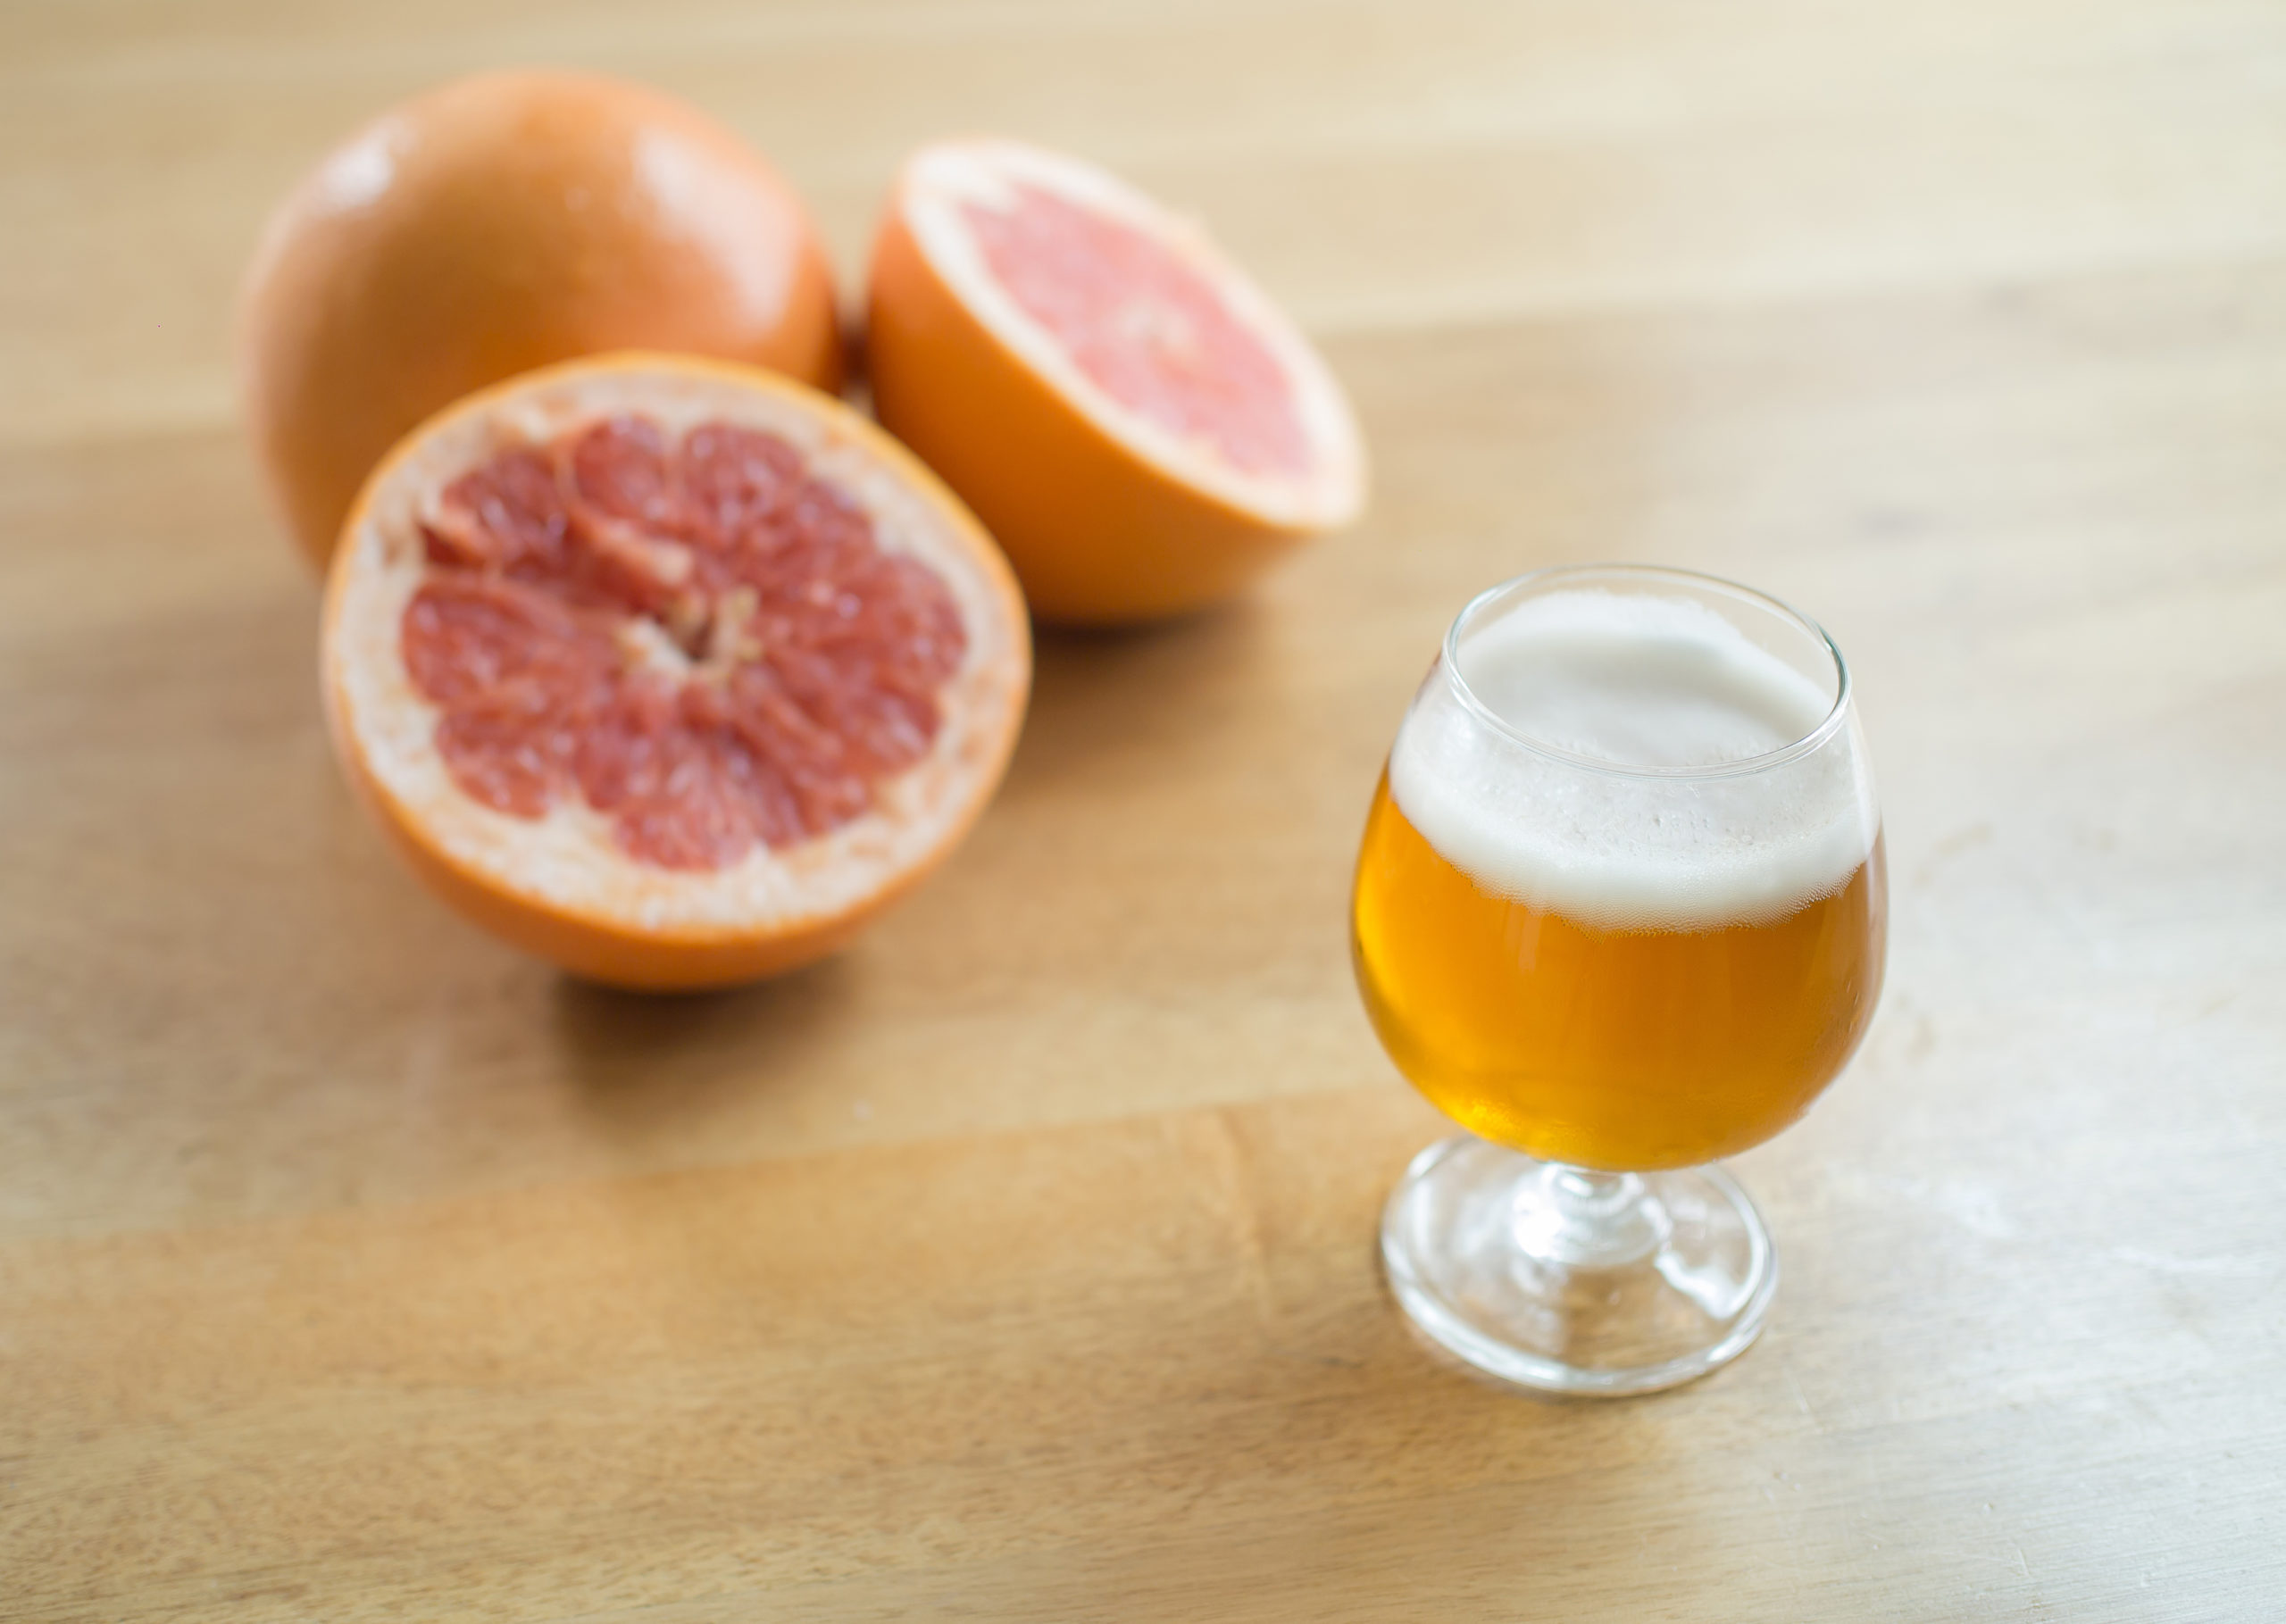 grapefruit and beer on table